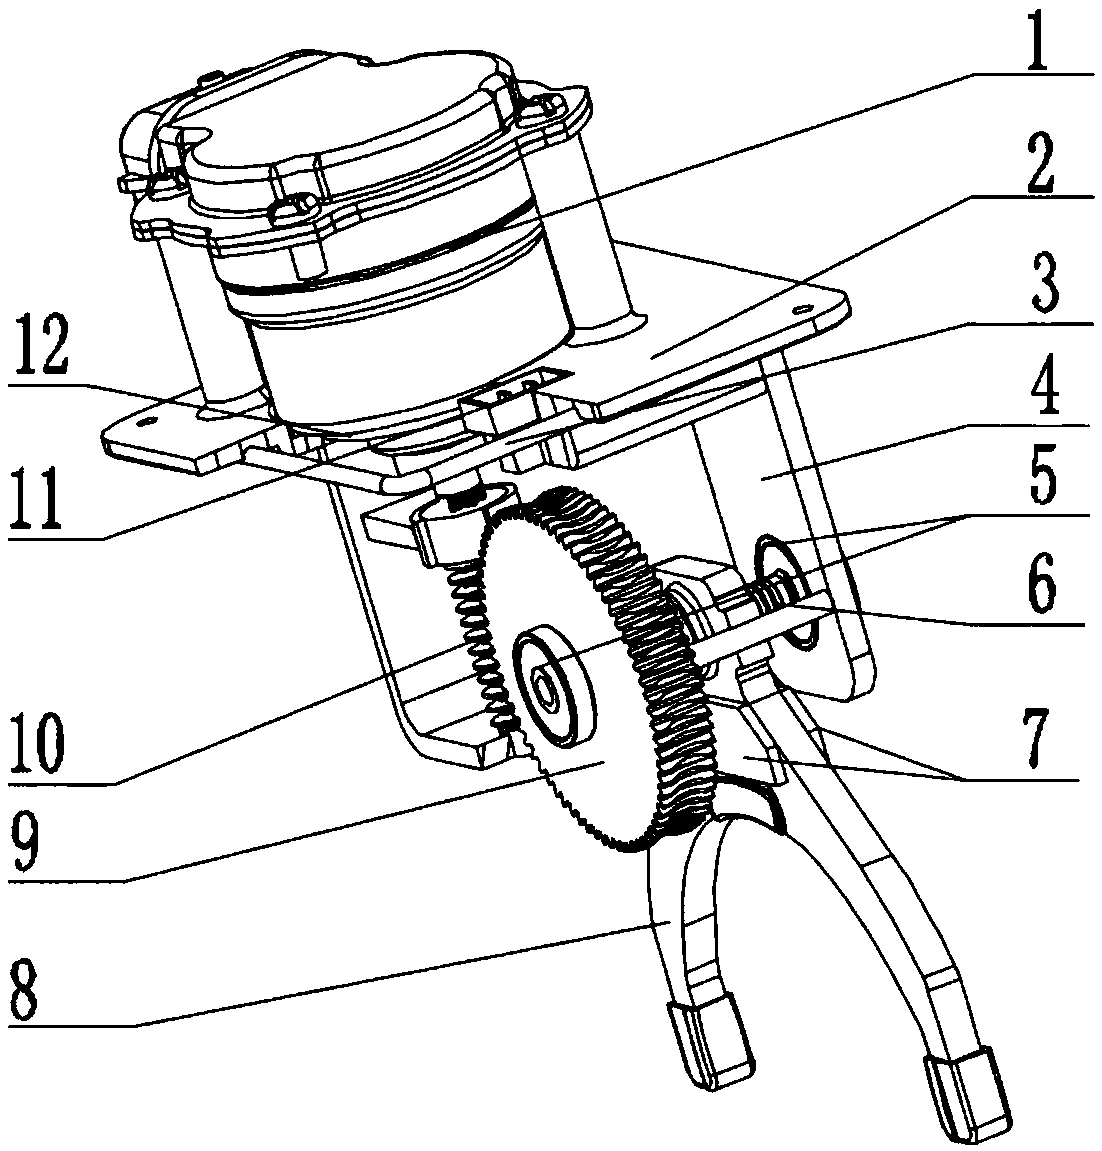 Transmission electric gear selecting and shifting system and car